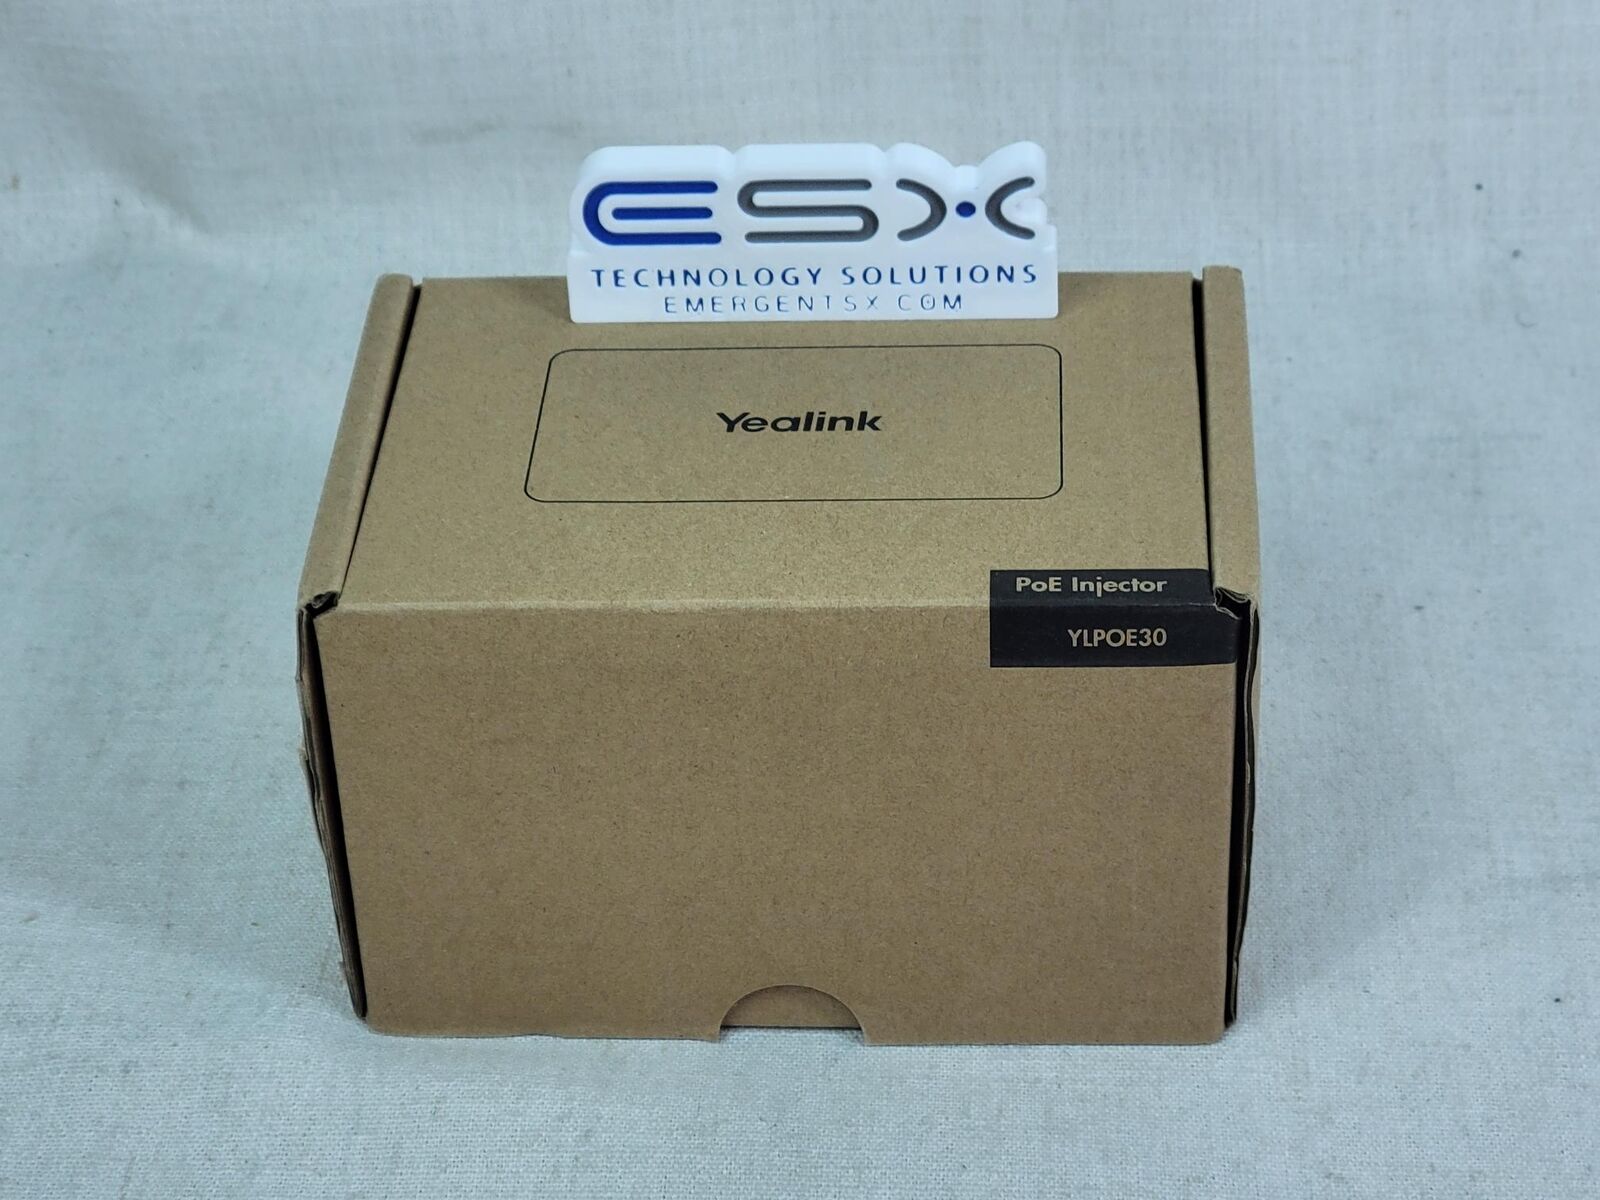 Yealink - PoE Injector for use with CP960 Conference Phone YLPOE30